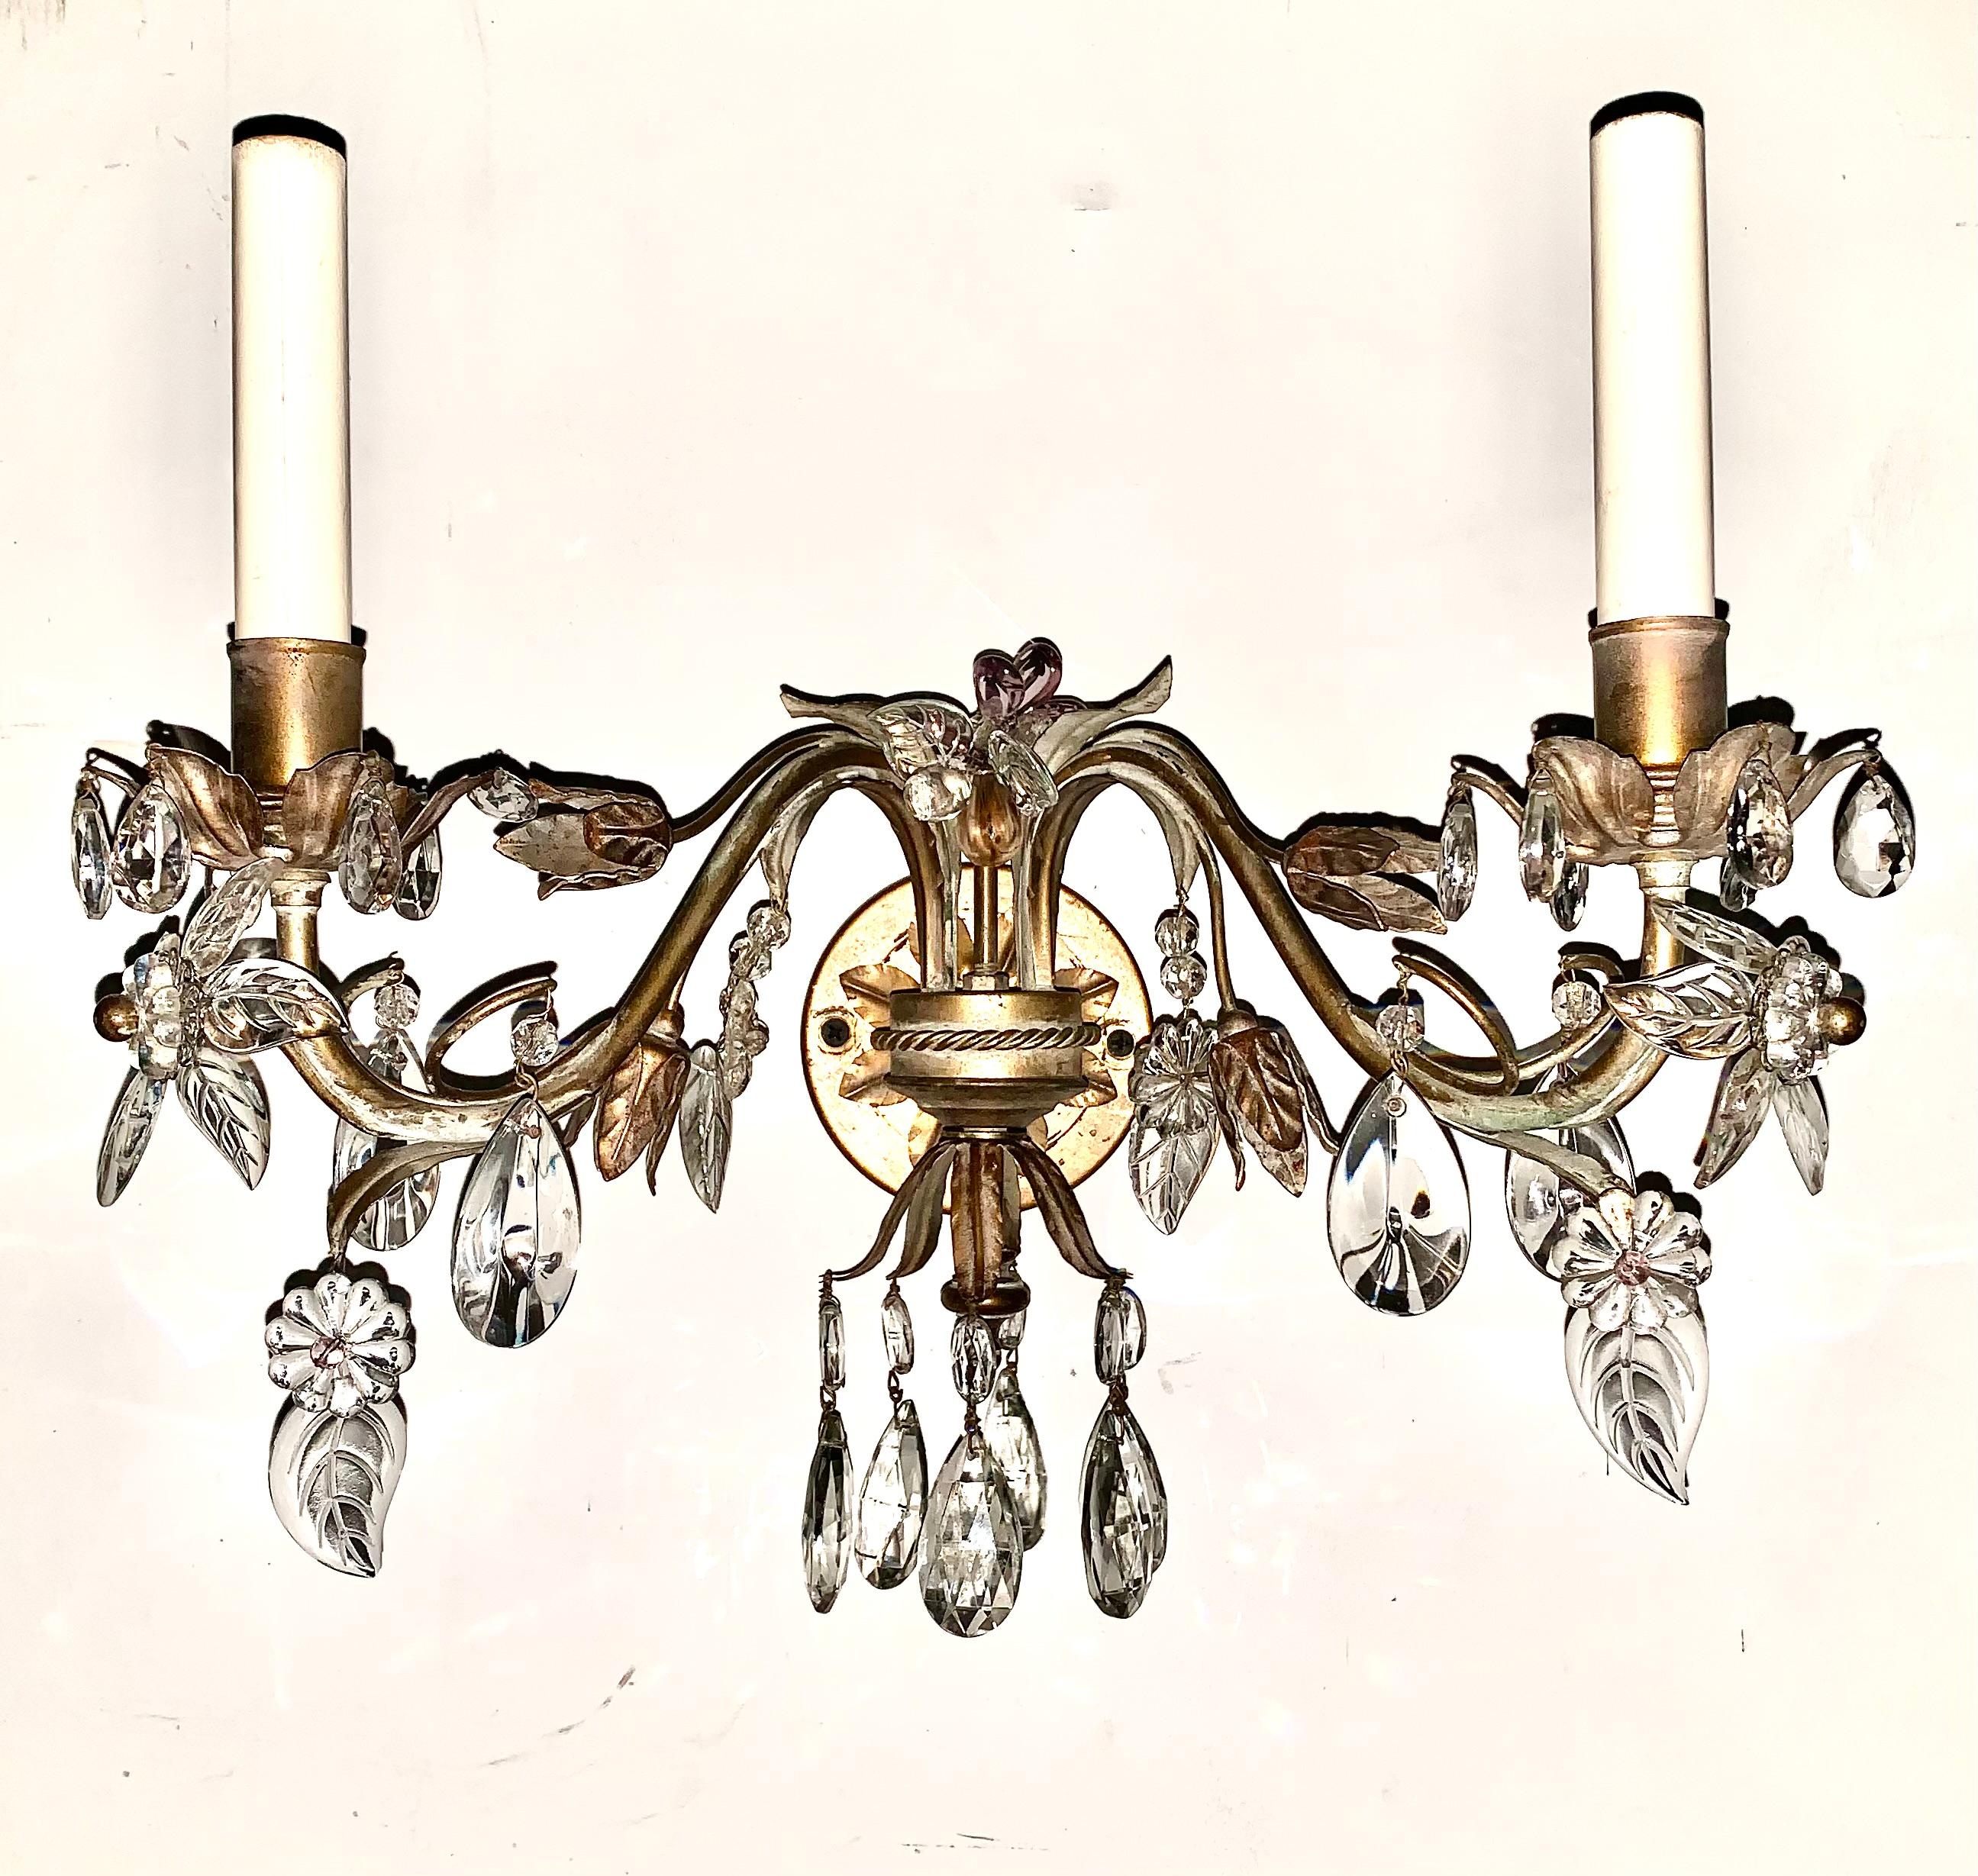 Pair French Maison Bagues style flower and leaf motif amethyst glass and crystal gilt metal two light sconces
20th Century
High quality, beautifully detailed French sconces composed of scrolled foliate and floral elements.
Wired for